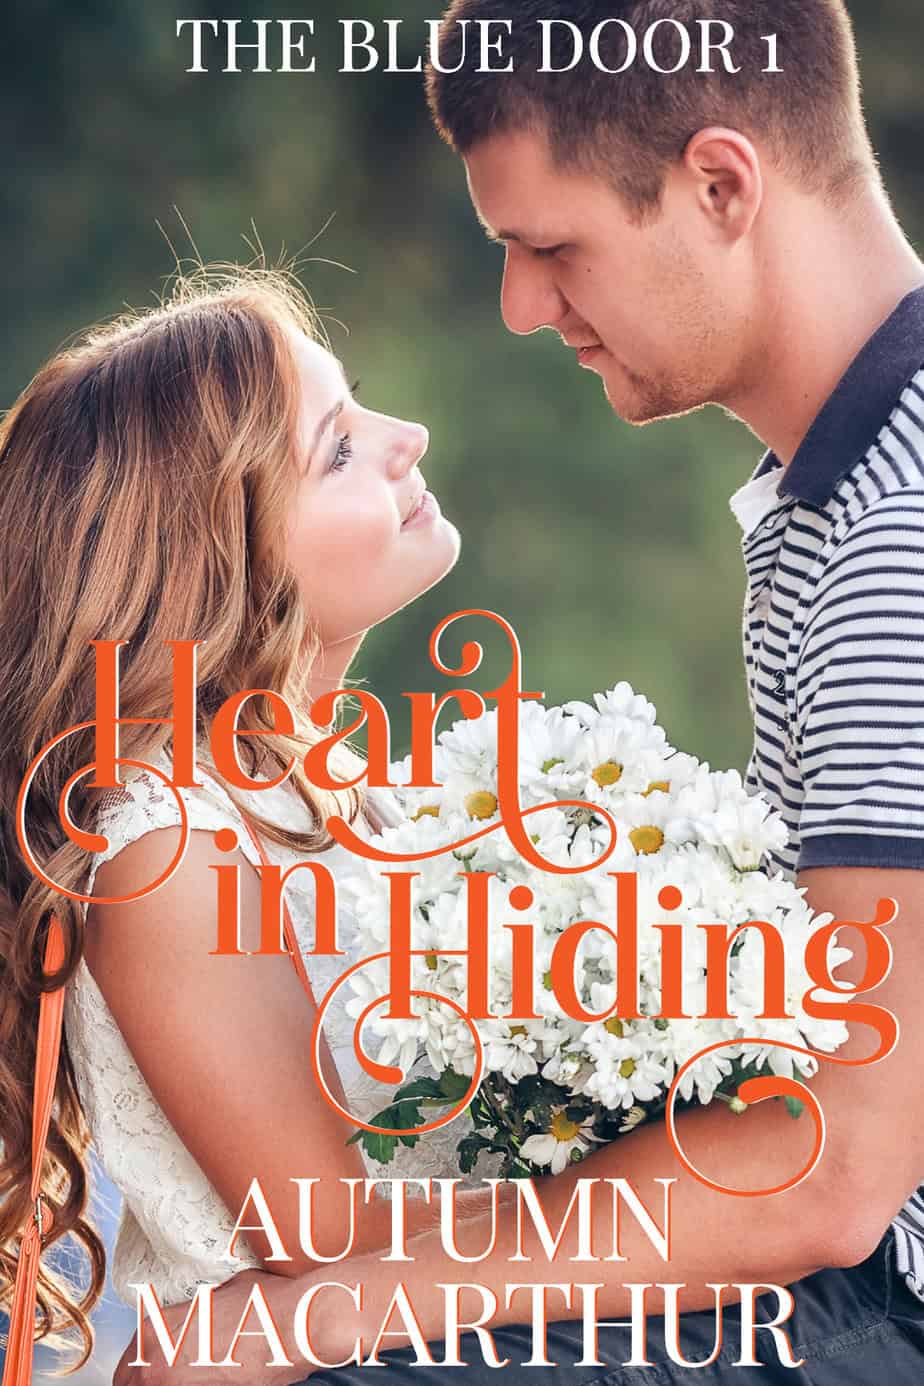 Cover for sweet Christian romance Heart in Hiding by Autumn Macarthur